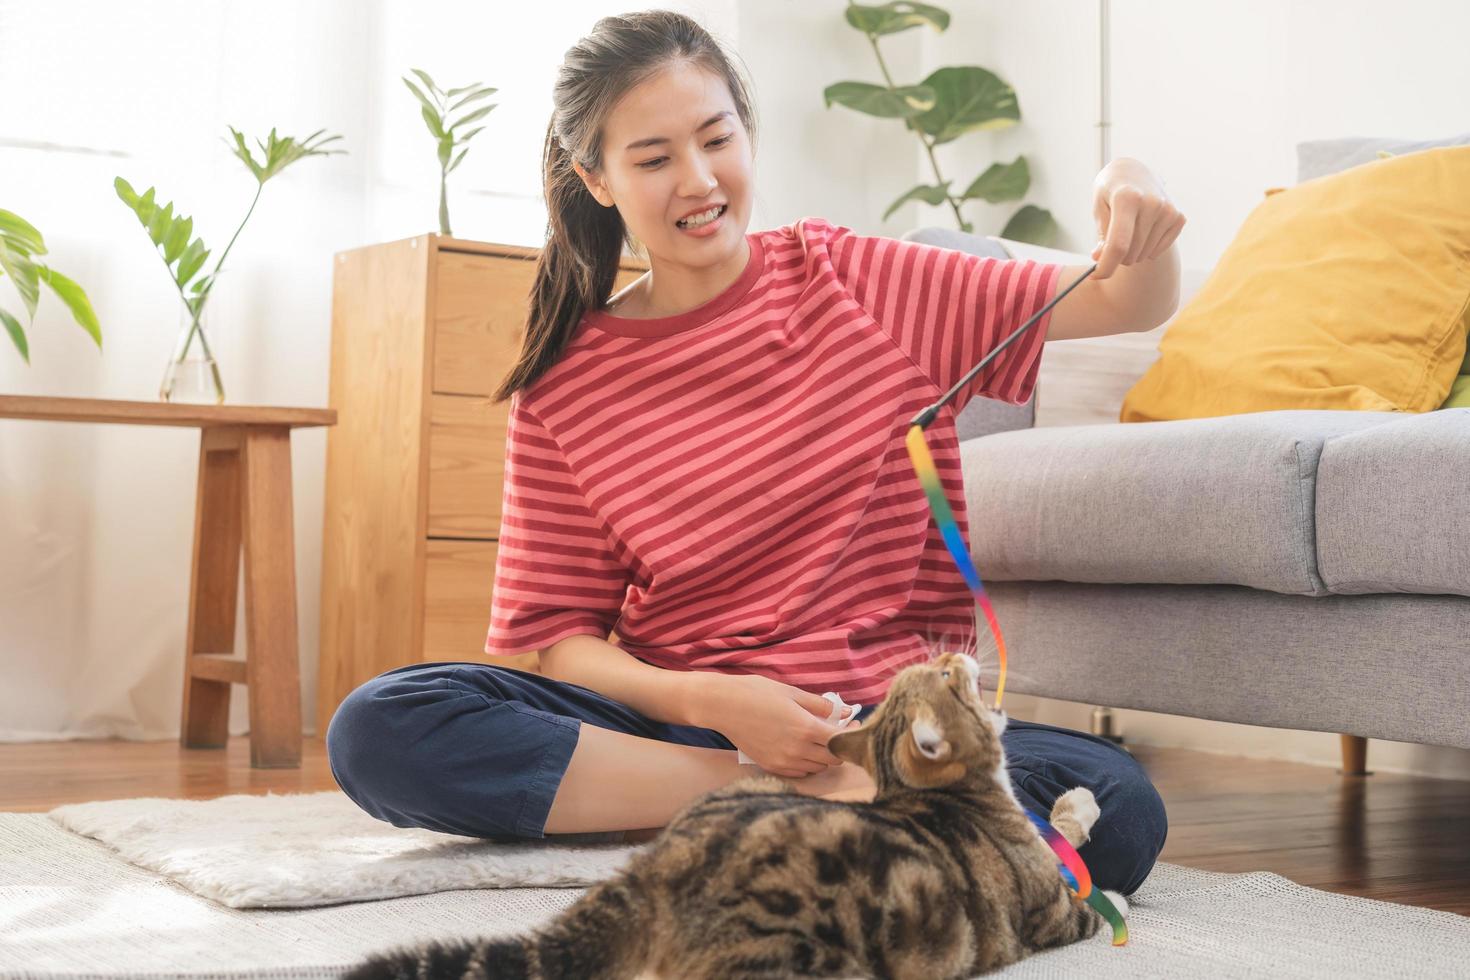 Recreation, beautiful owner kitten asian young woman, girl happy face in free time in casual holding toy playing with lovey cat, sitting on carpet in living room while rest at her home or apartment. photo